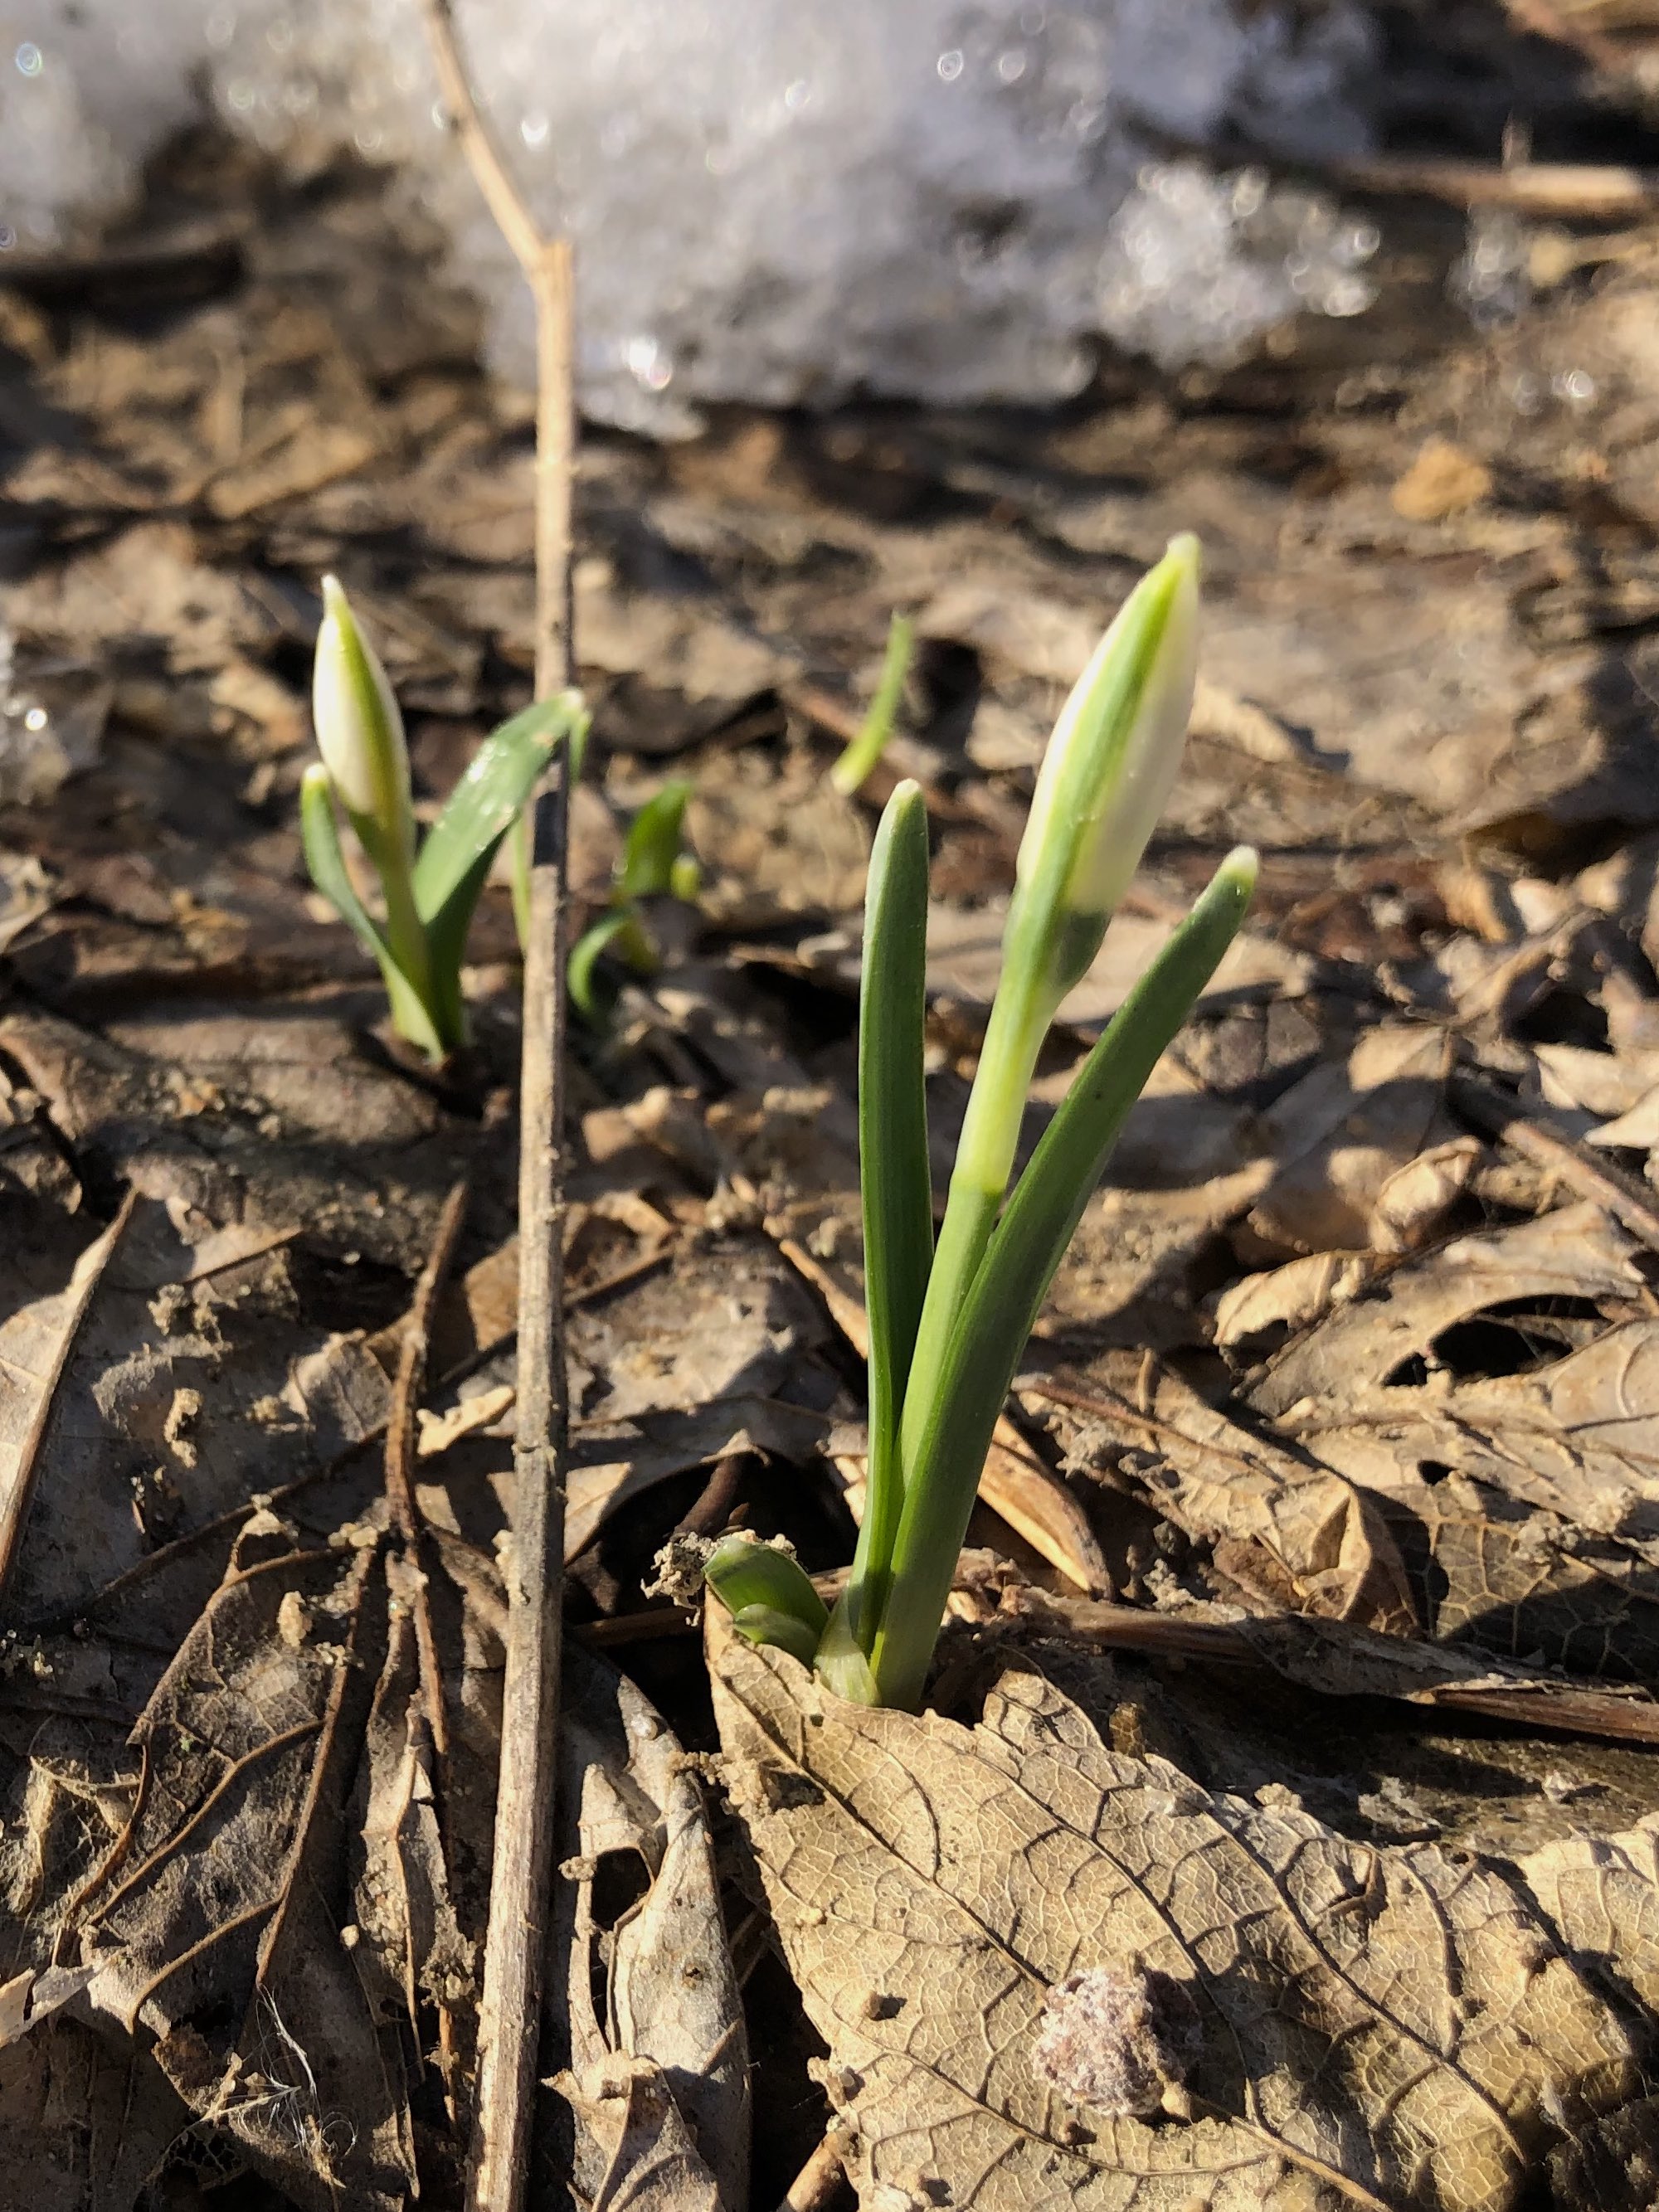 Snowdrops emerging in Madison Wisconsin along Arbor Drive on March 5, 2021.